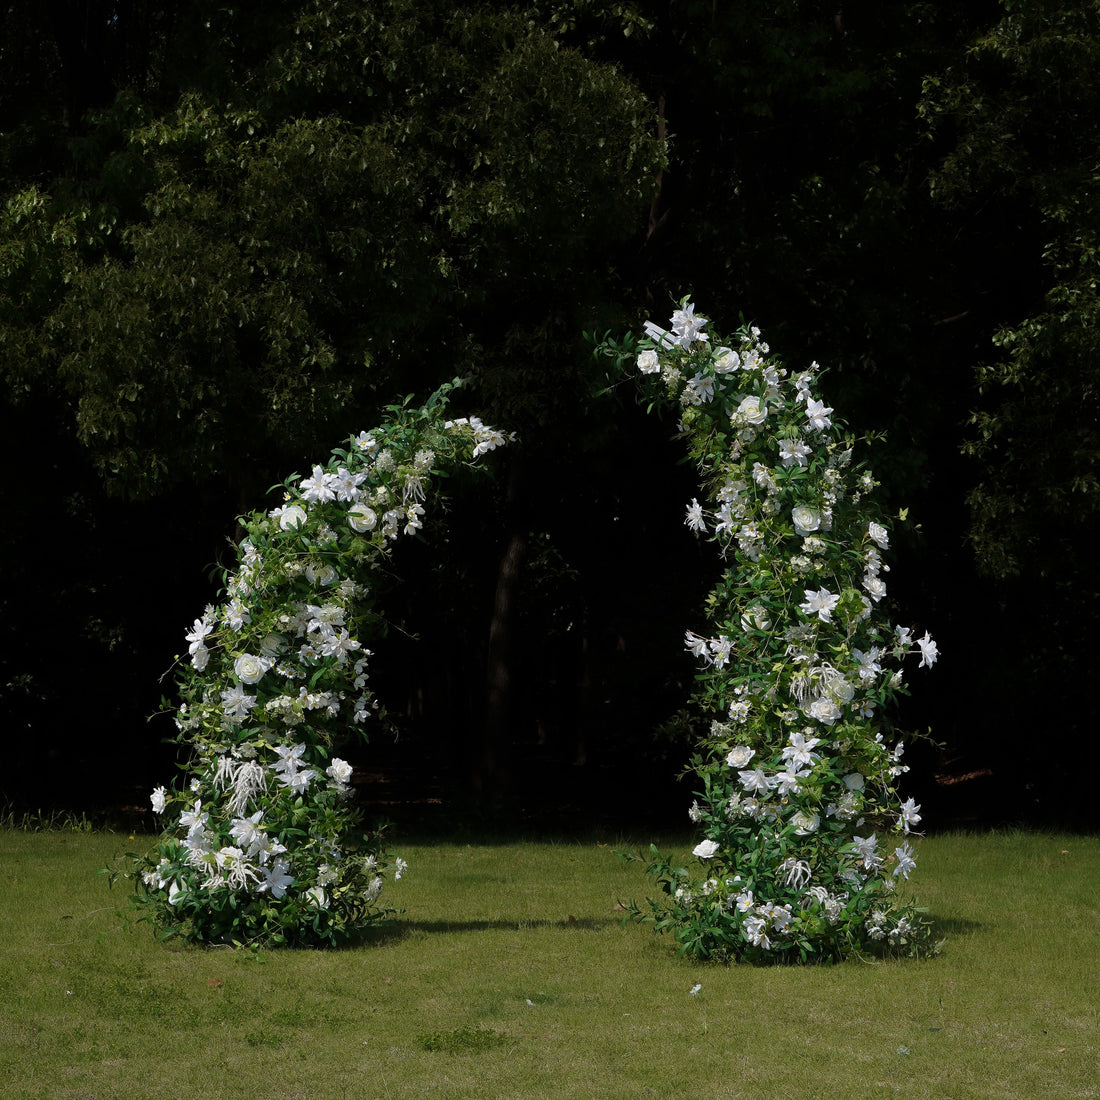 Made of artificial flowers, this flower arch is suitable for weddings, parties, birthdays and other events. The flower arch is made of metal frame, easy to assemble and disassemble. Big enough for your guests to take pictures and keep. Flower arches are made of high quality material and durable. The color of the floral arch can be chosen according to your wedding theme. A floral arch is the perfect decoration for any occasion and is sure to impress your guests.